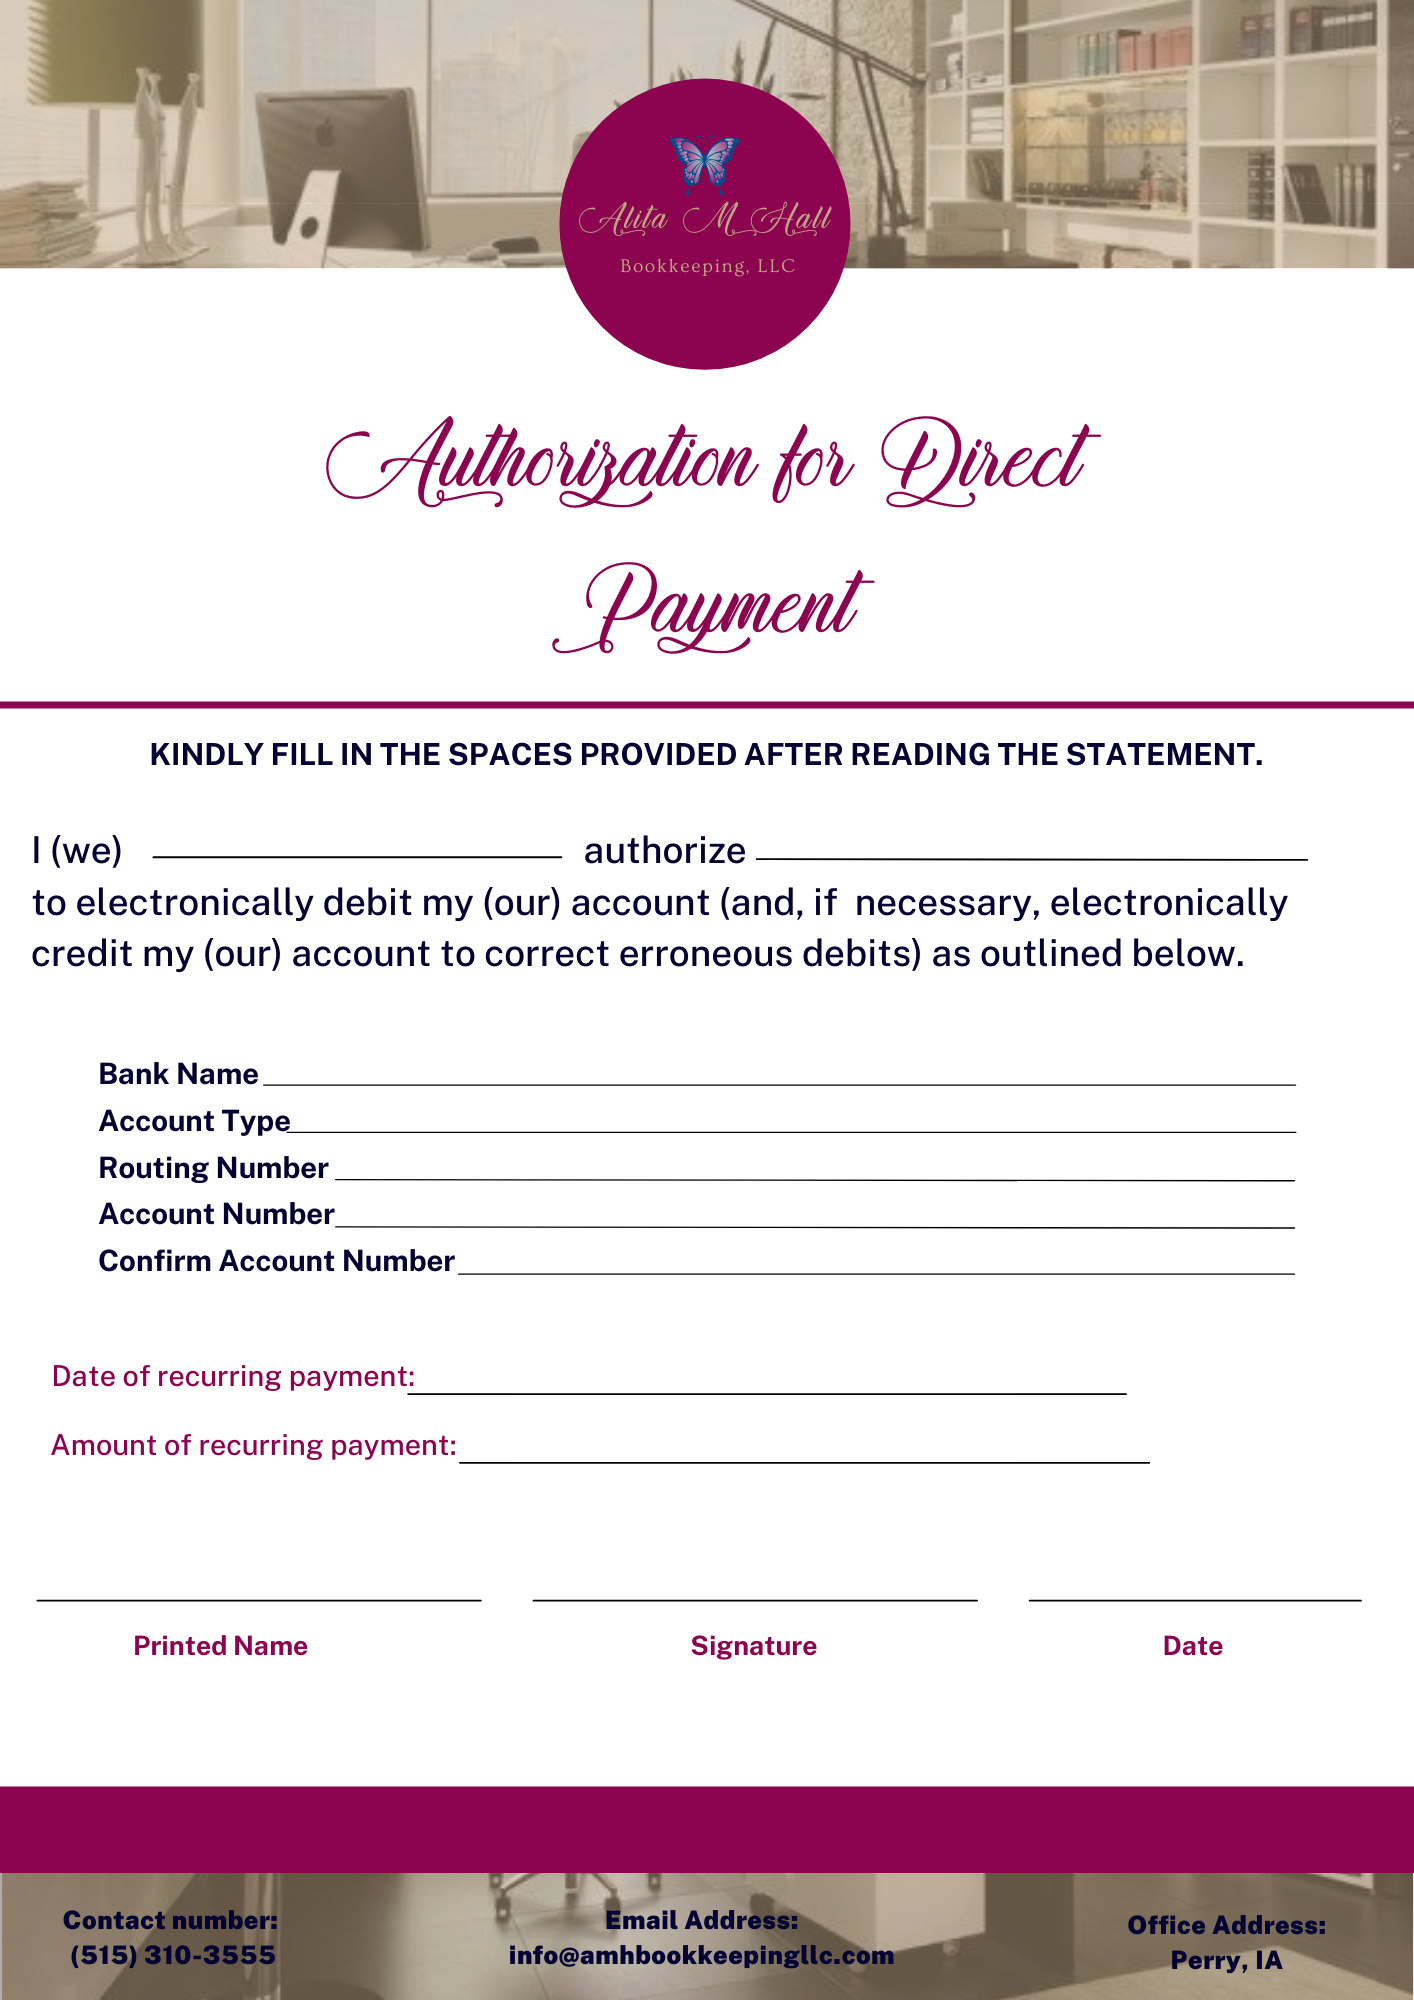 Copy of Payment Authorization Form